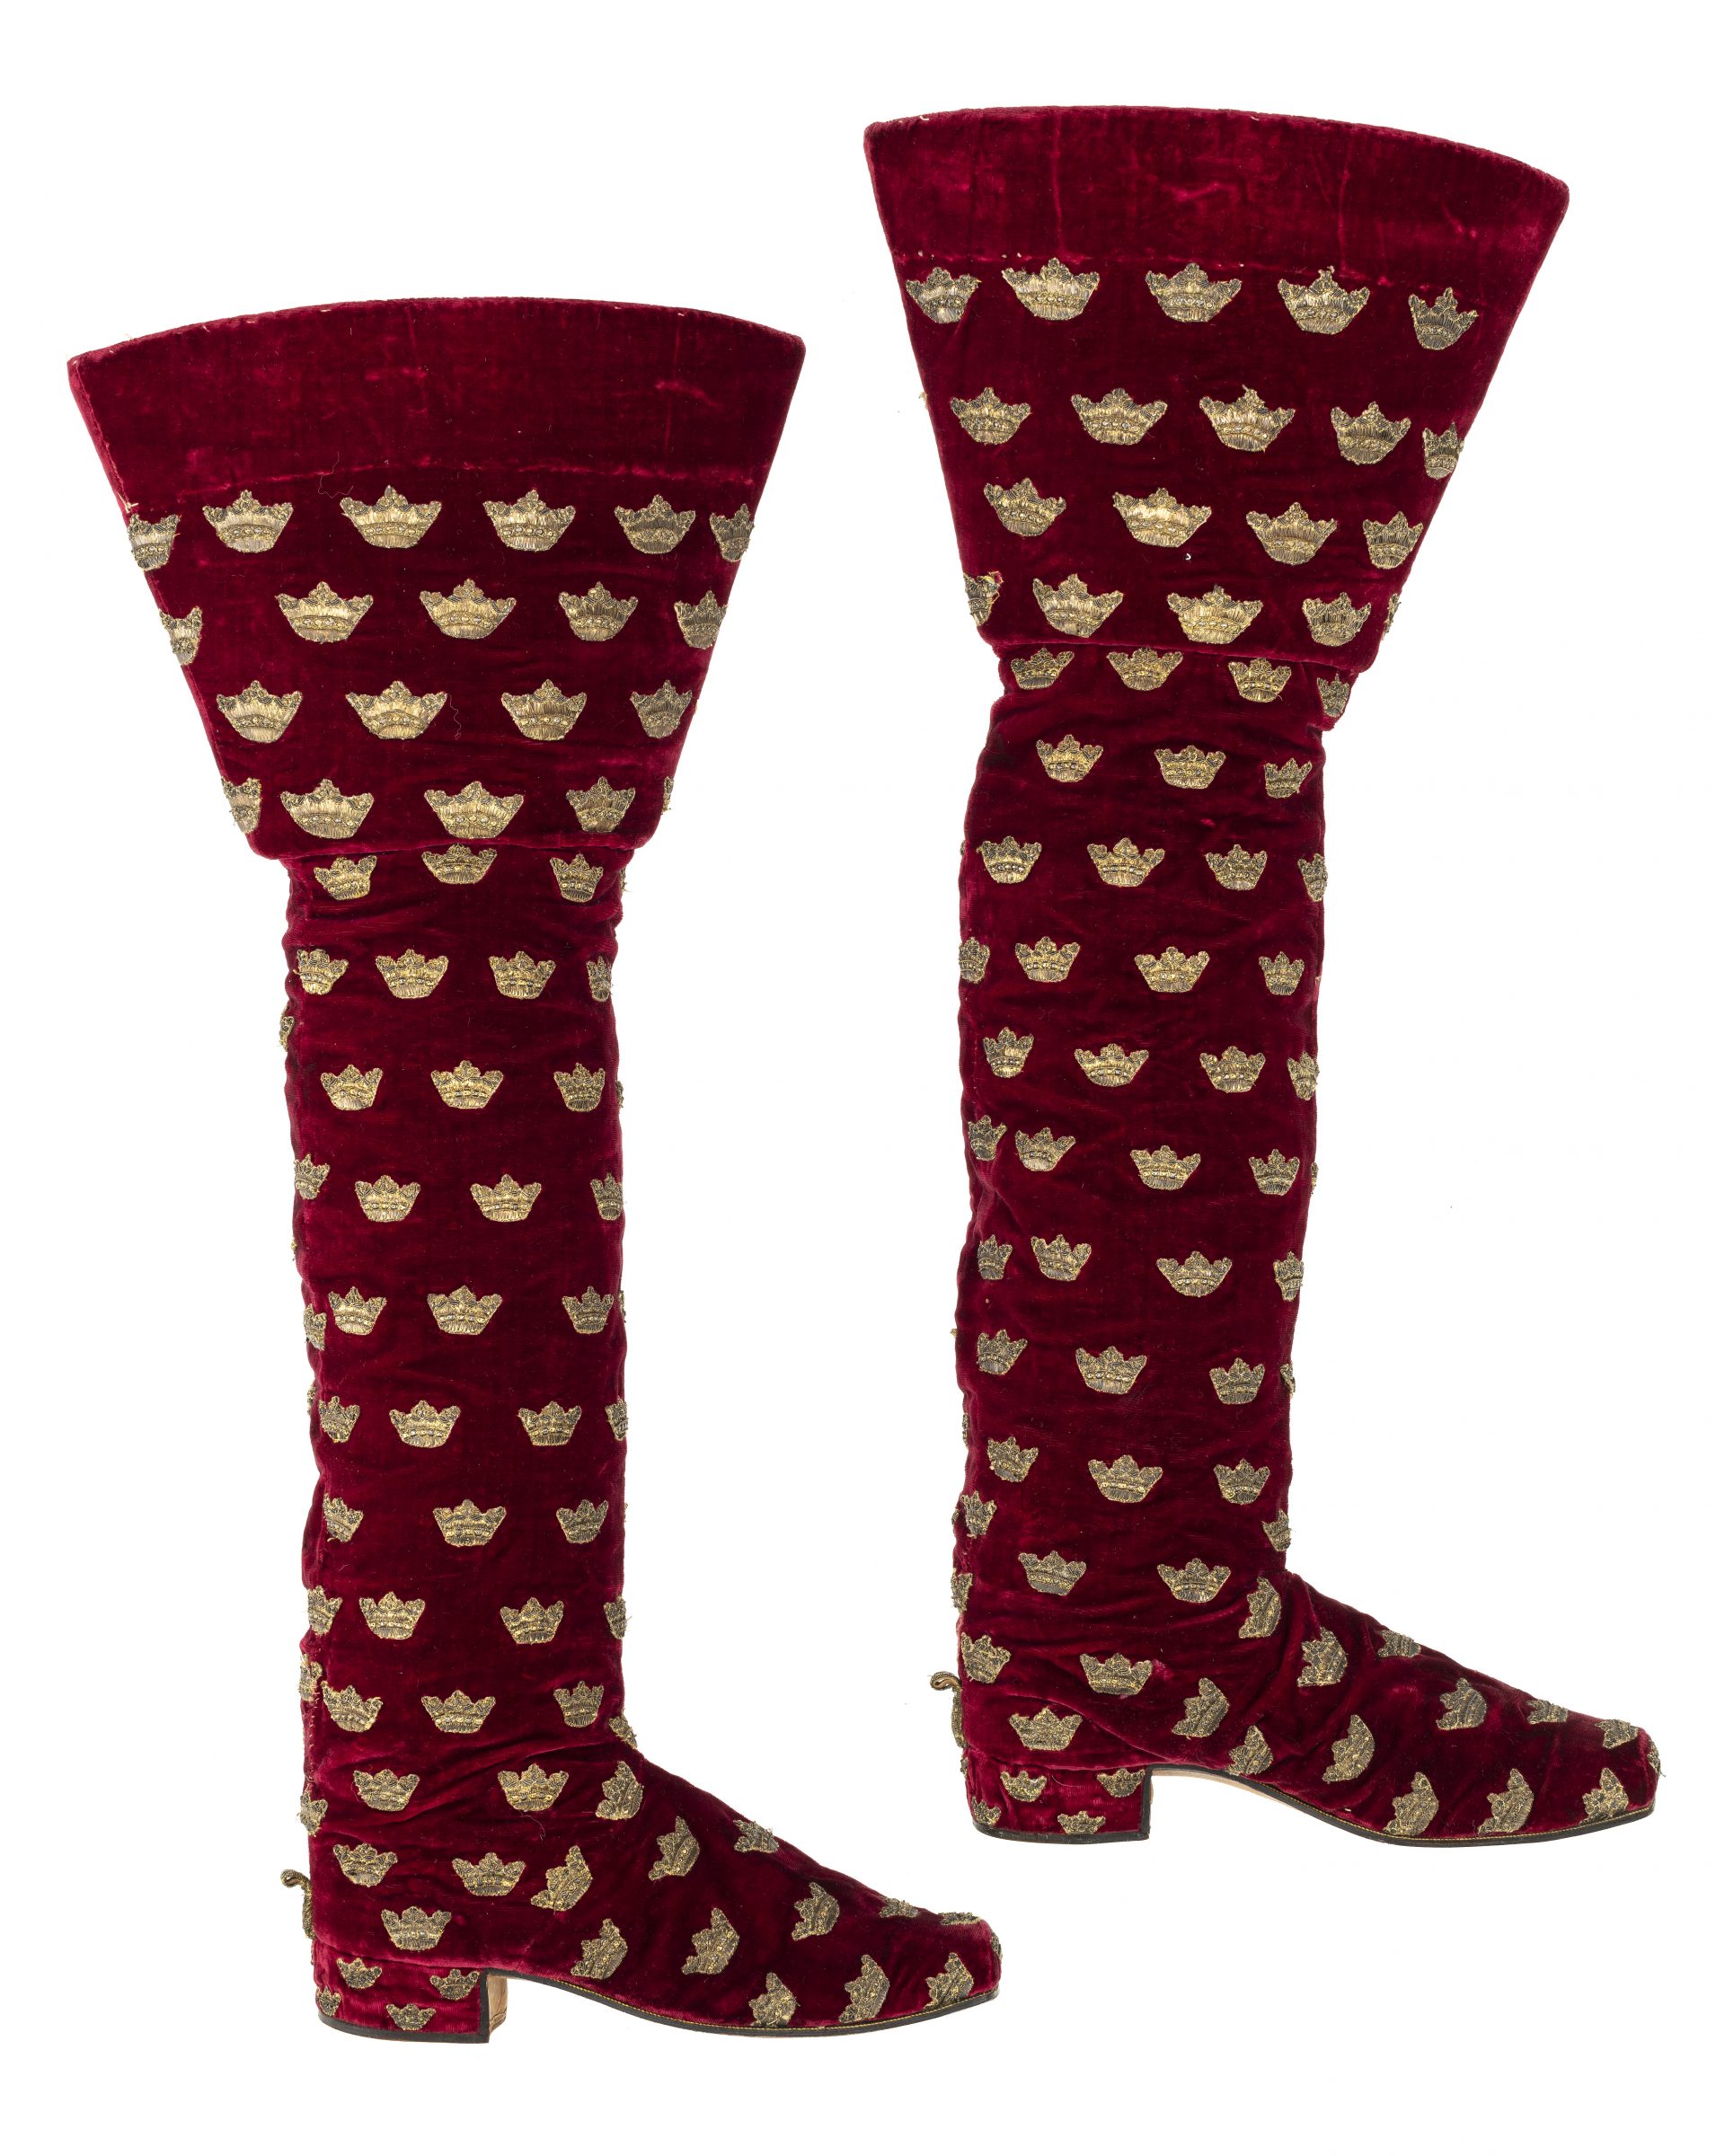 High red velvet boots with embroidered gold crowns.